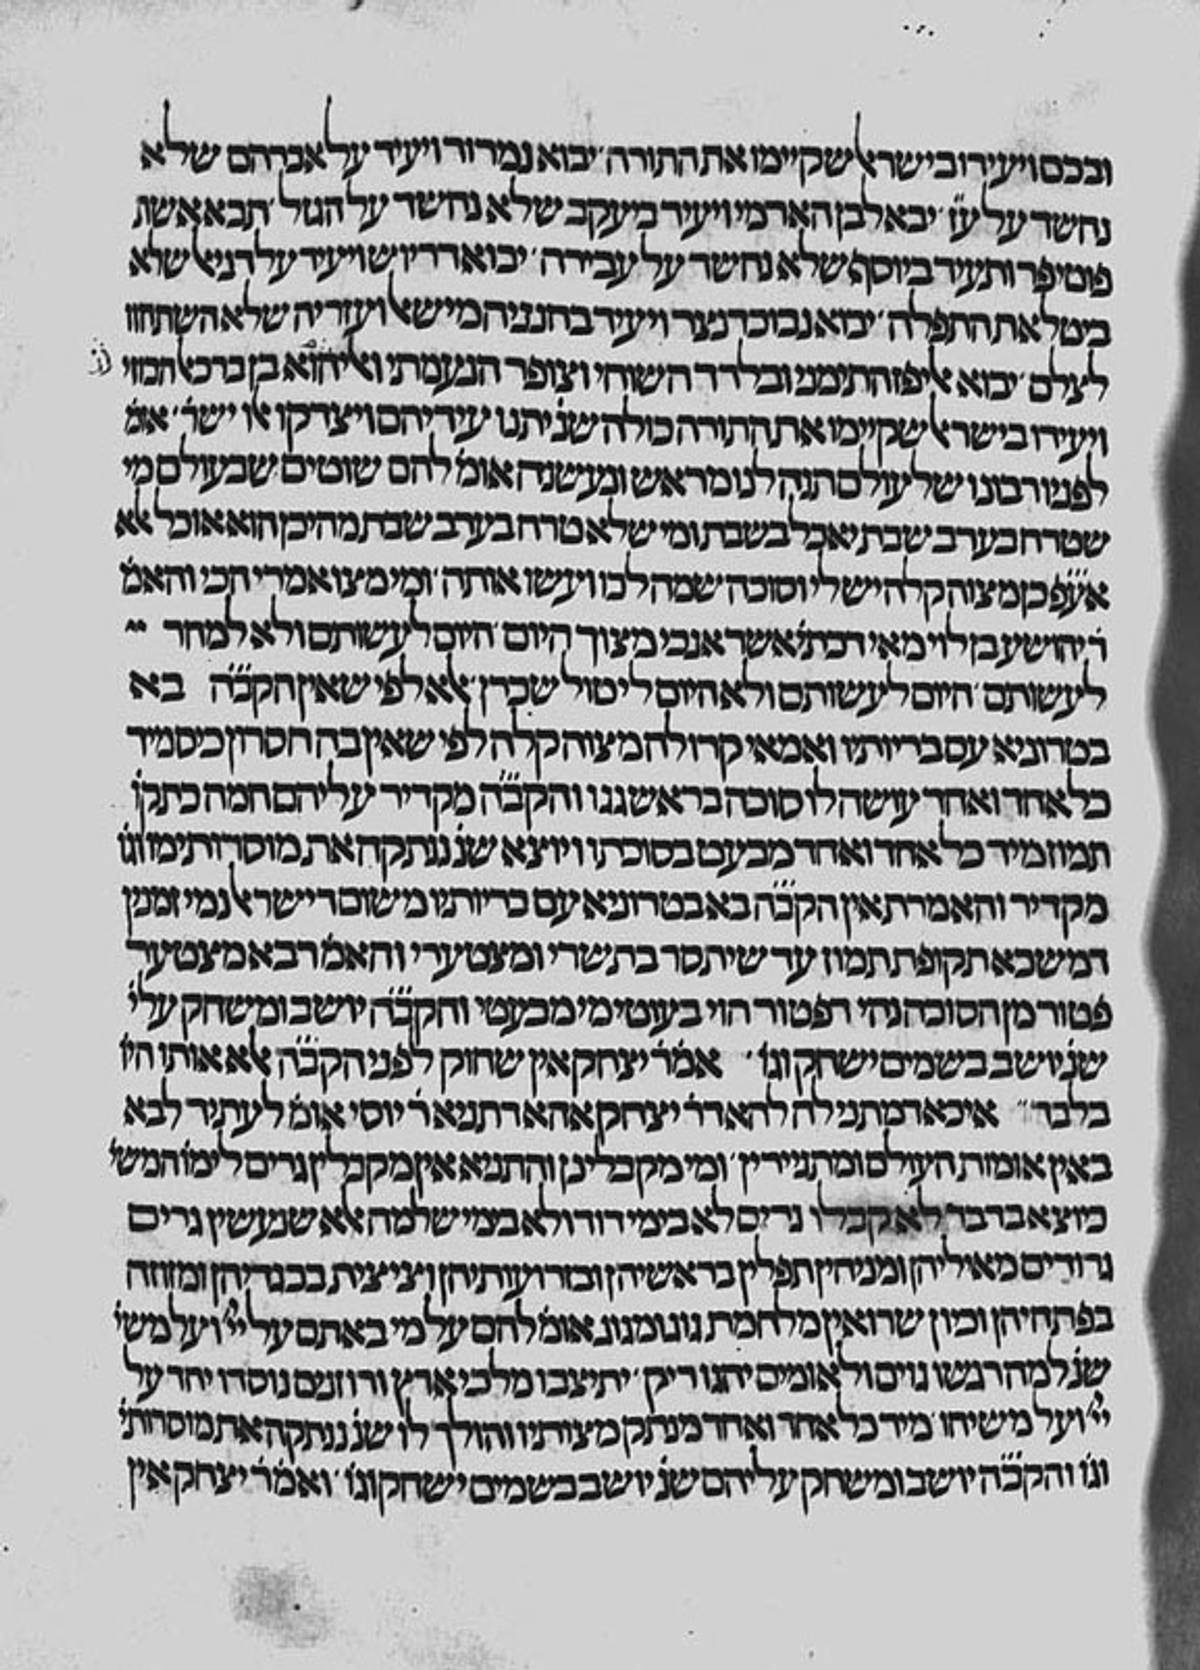 A page from a manuscript of the Babylonian Talmud in which the story about God’s schedule is told (Bavli Avodah Zarah 3b)